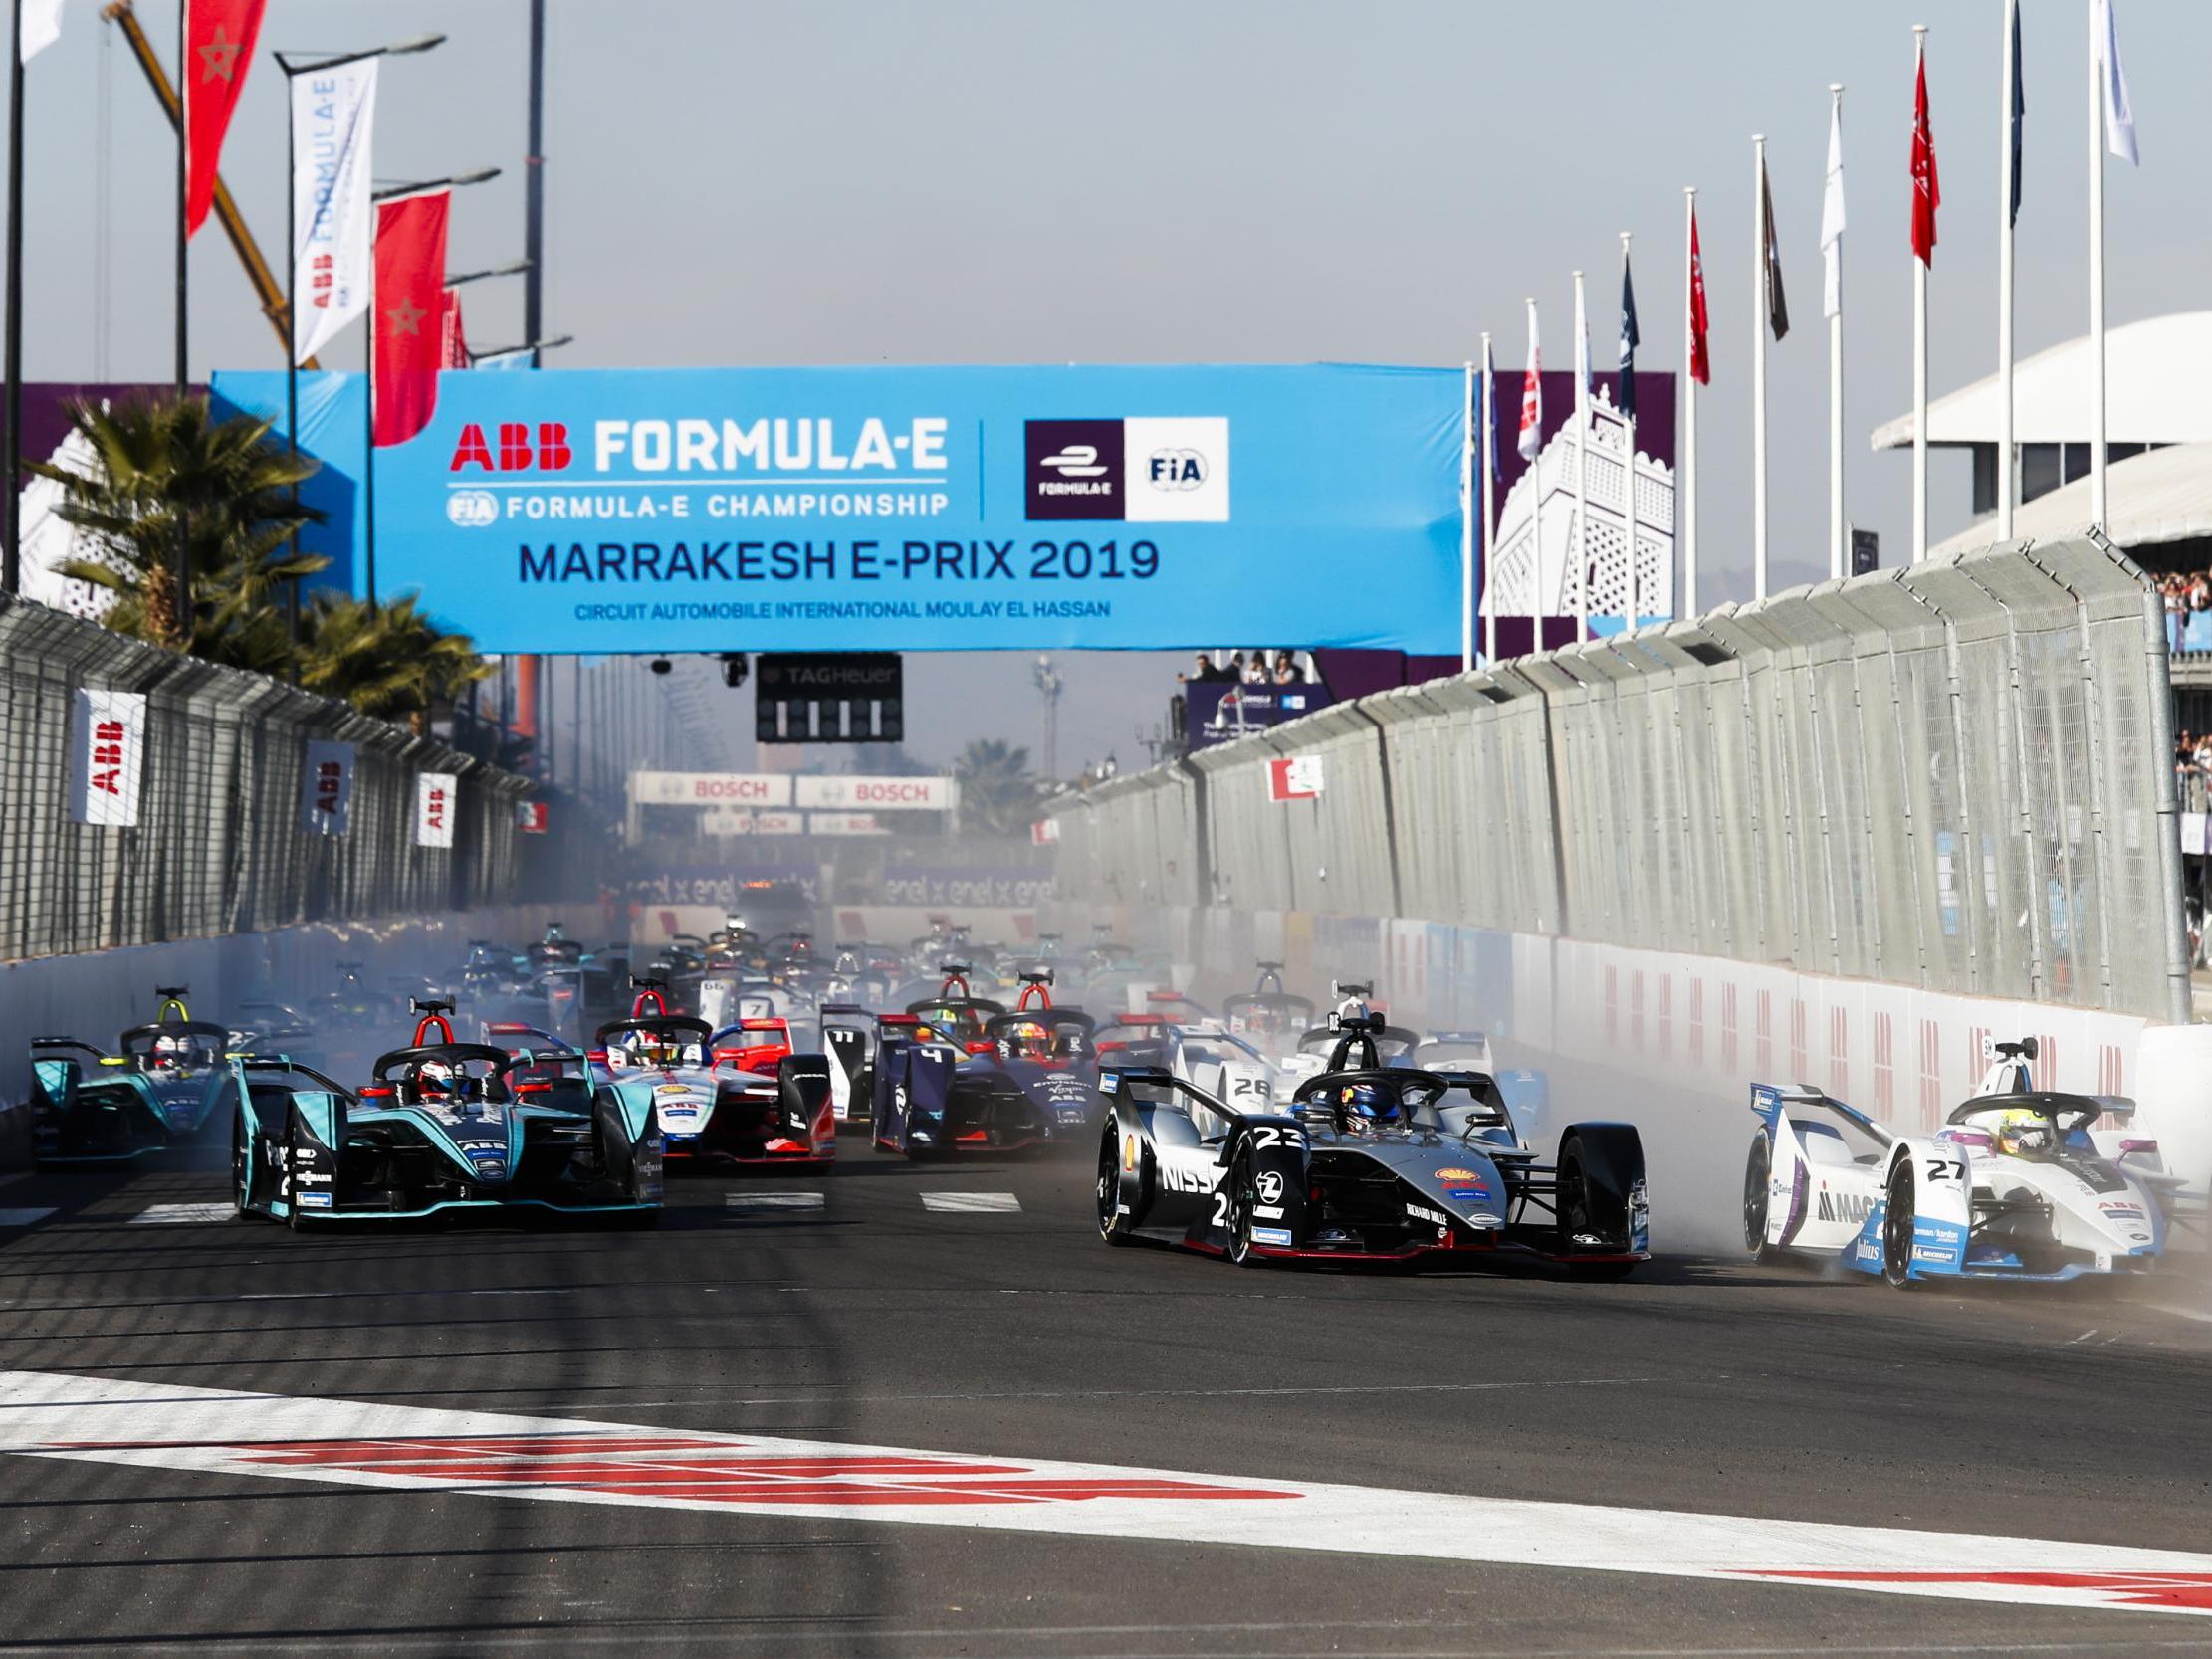 Formula E is looking to export its product across the globe and has already visited a host of iconic cities this season